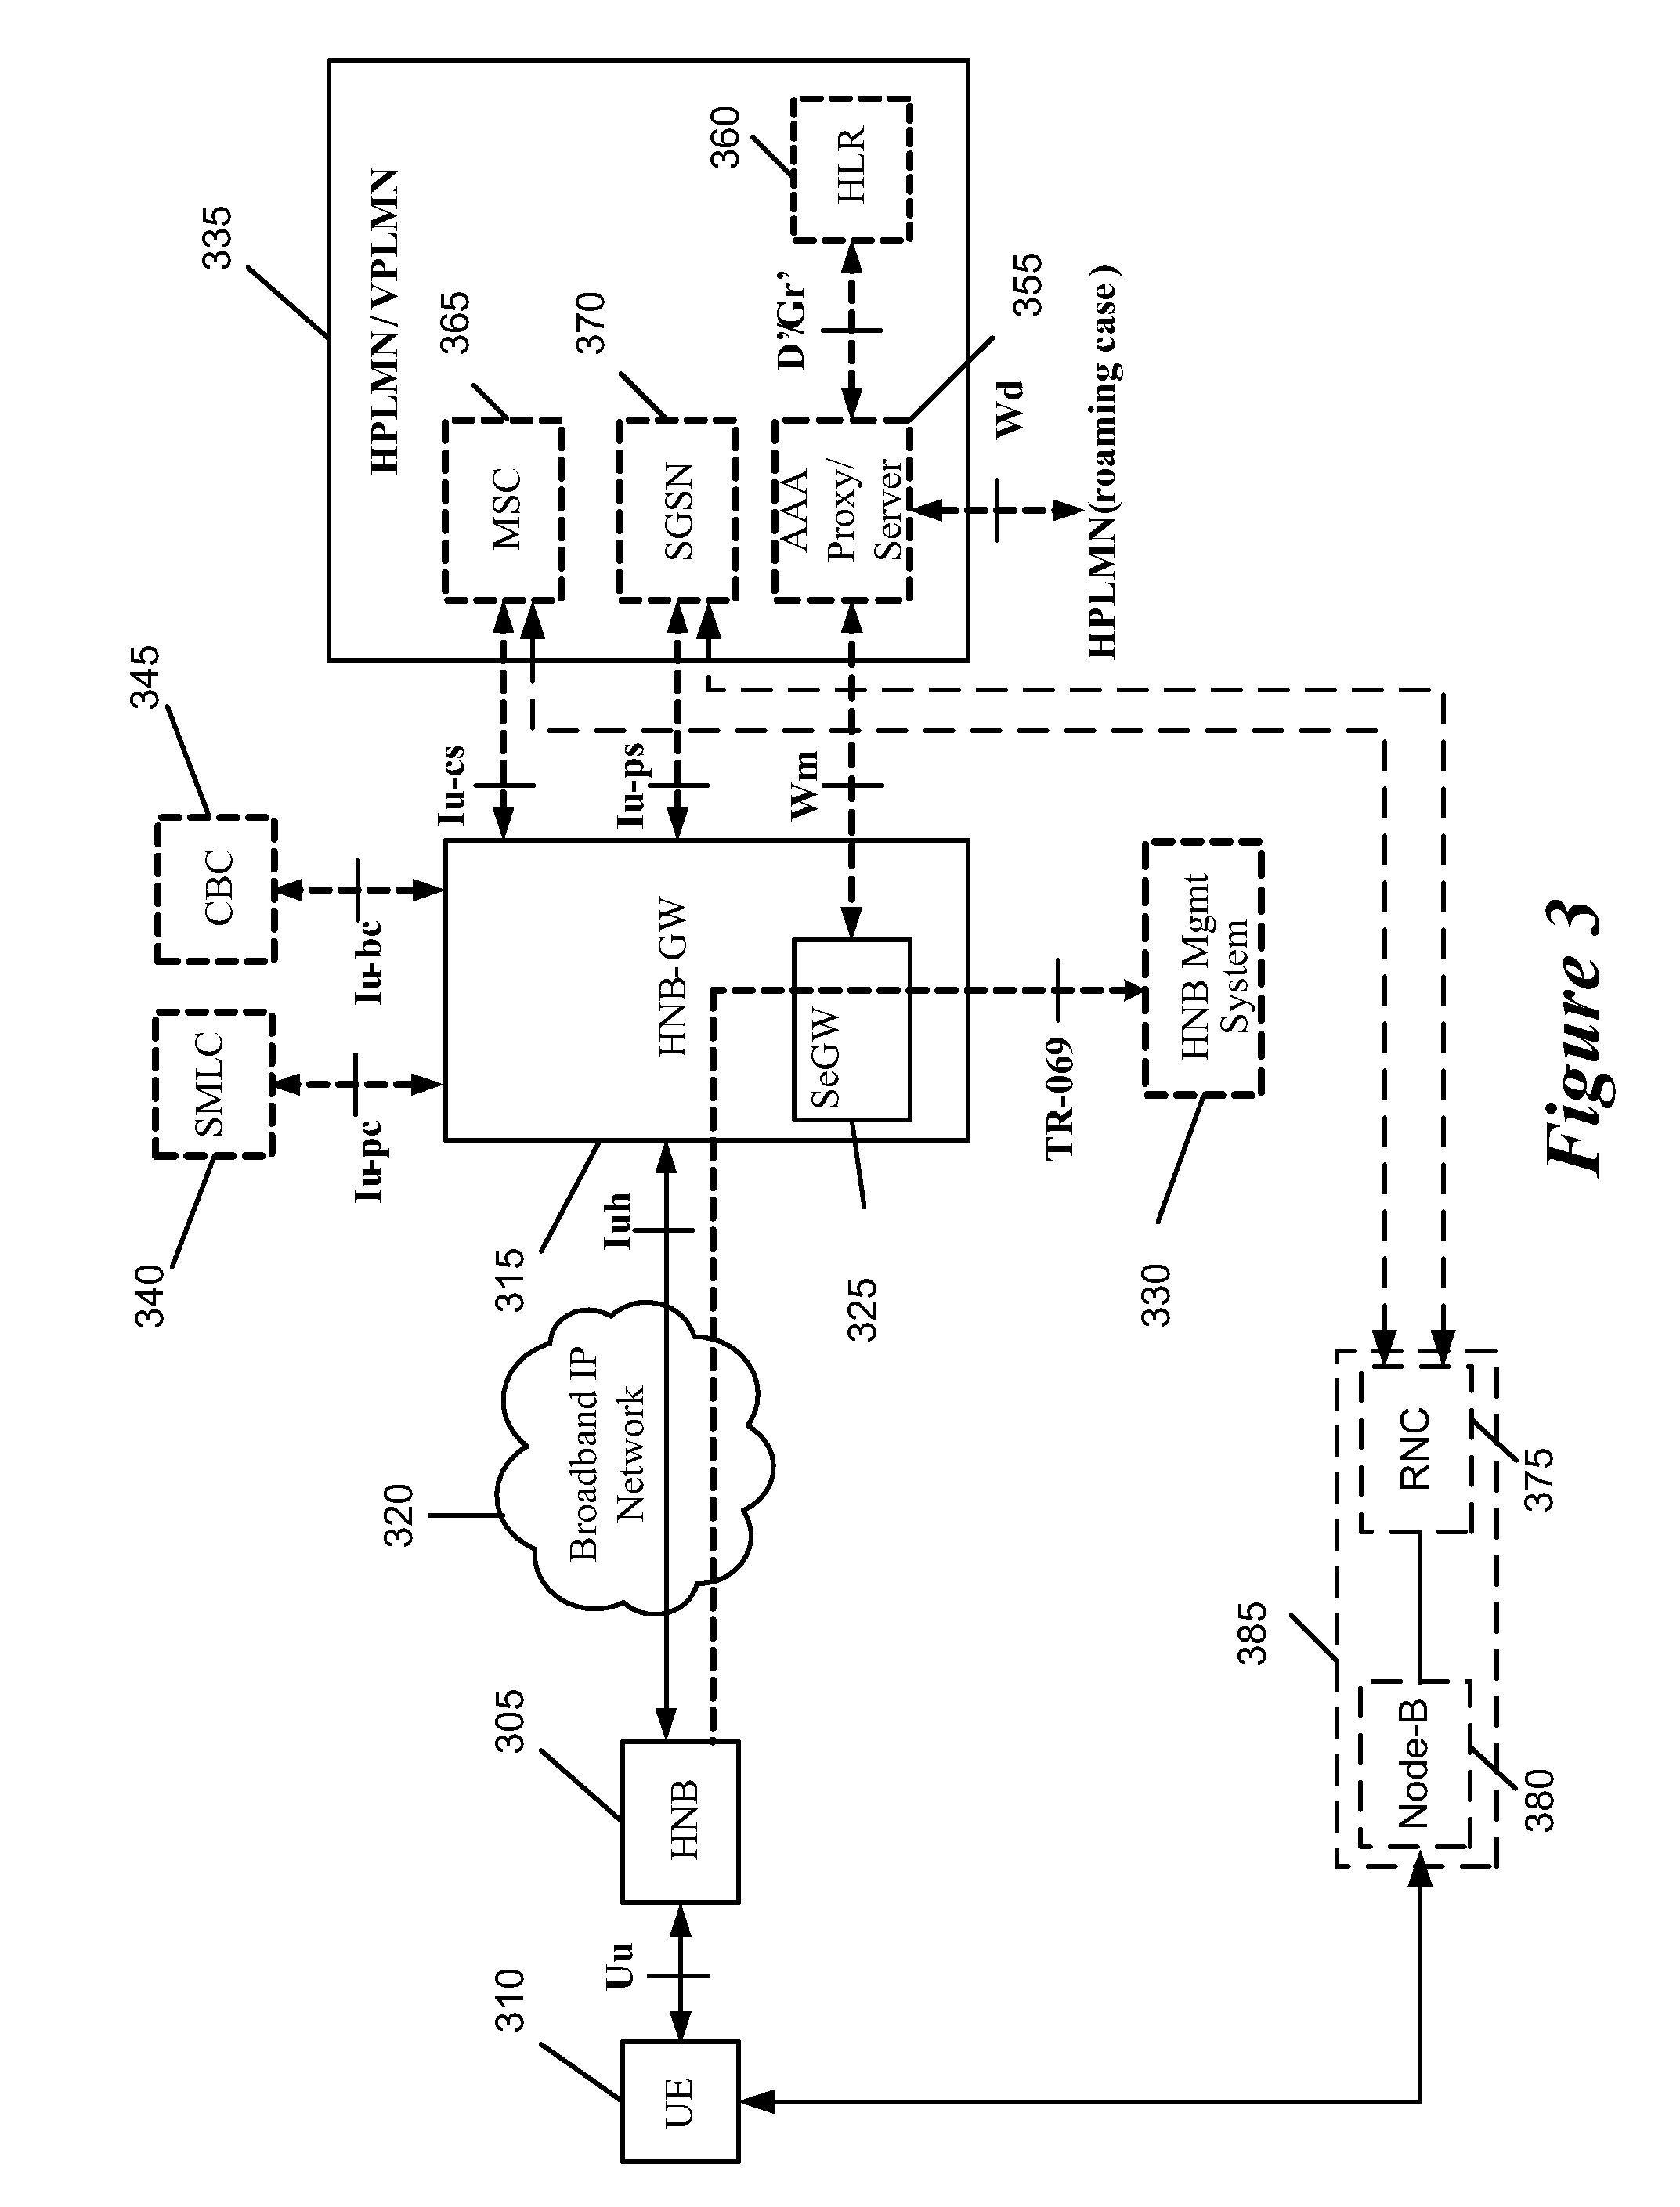 Method and Apparatus for Setup and Release of User Equipment Context Identifiers in a Home Node B System